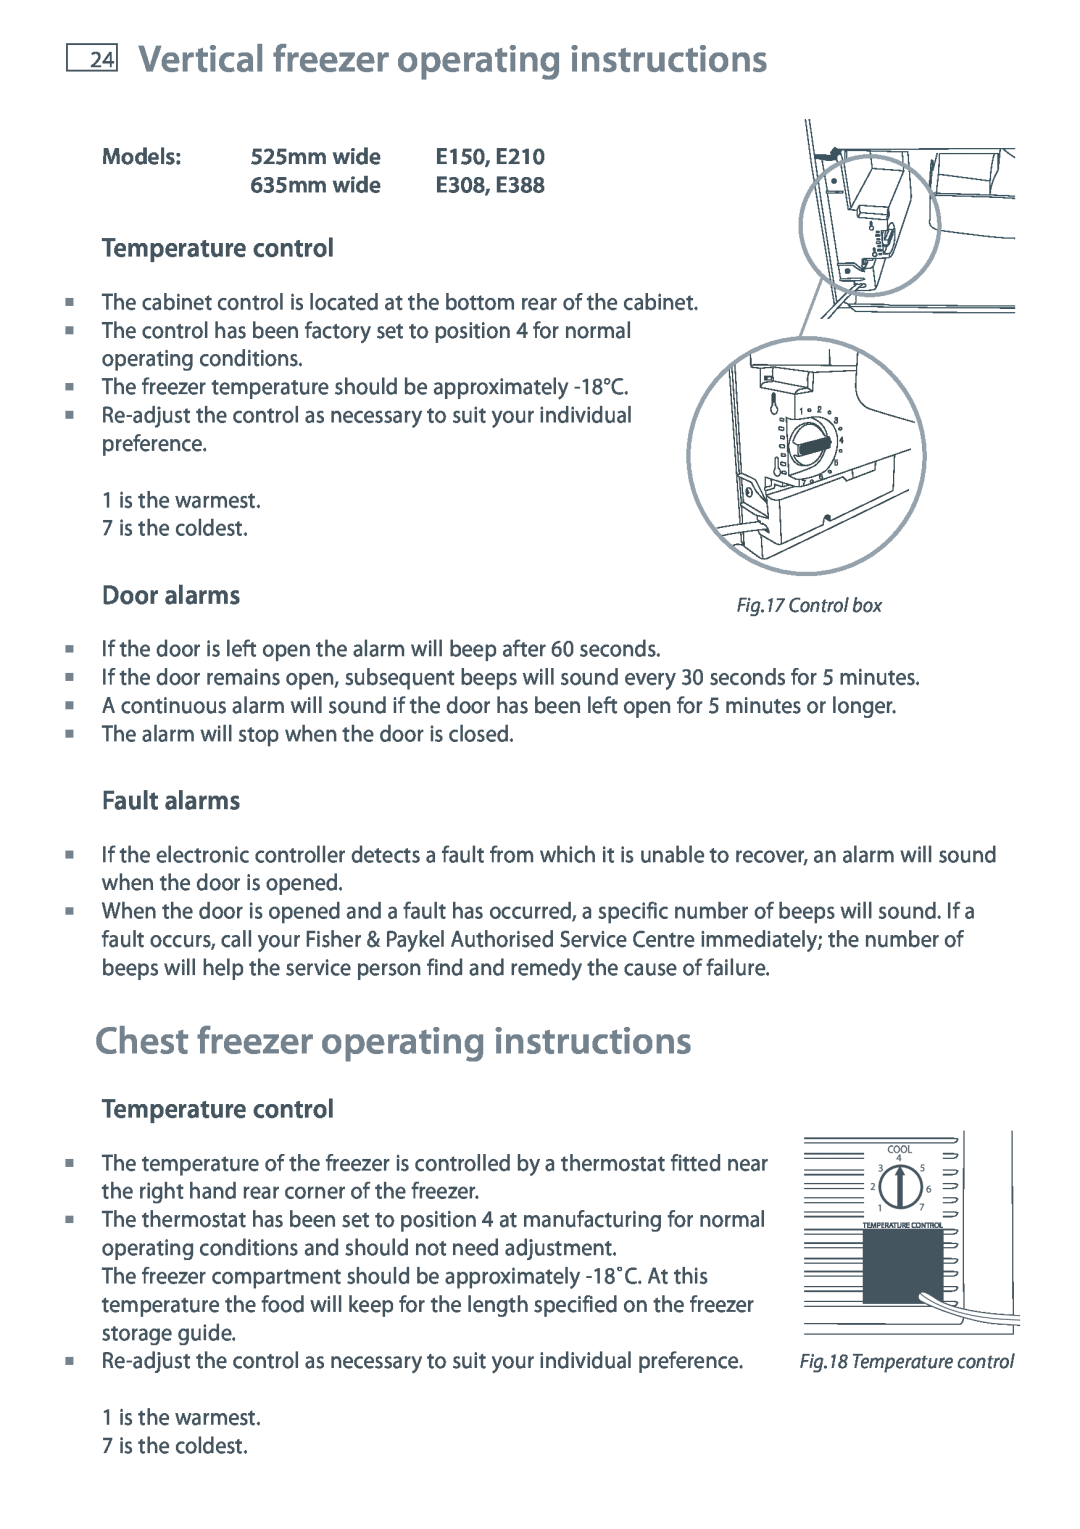 Fisher & Paykel E440T Vertical freezer operating instructions, Chest freezer operating instructions, Temperature control 